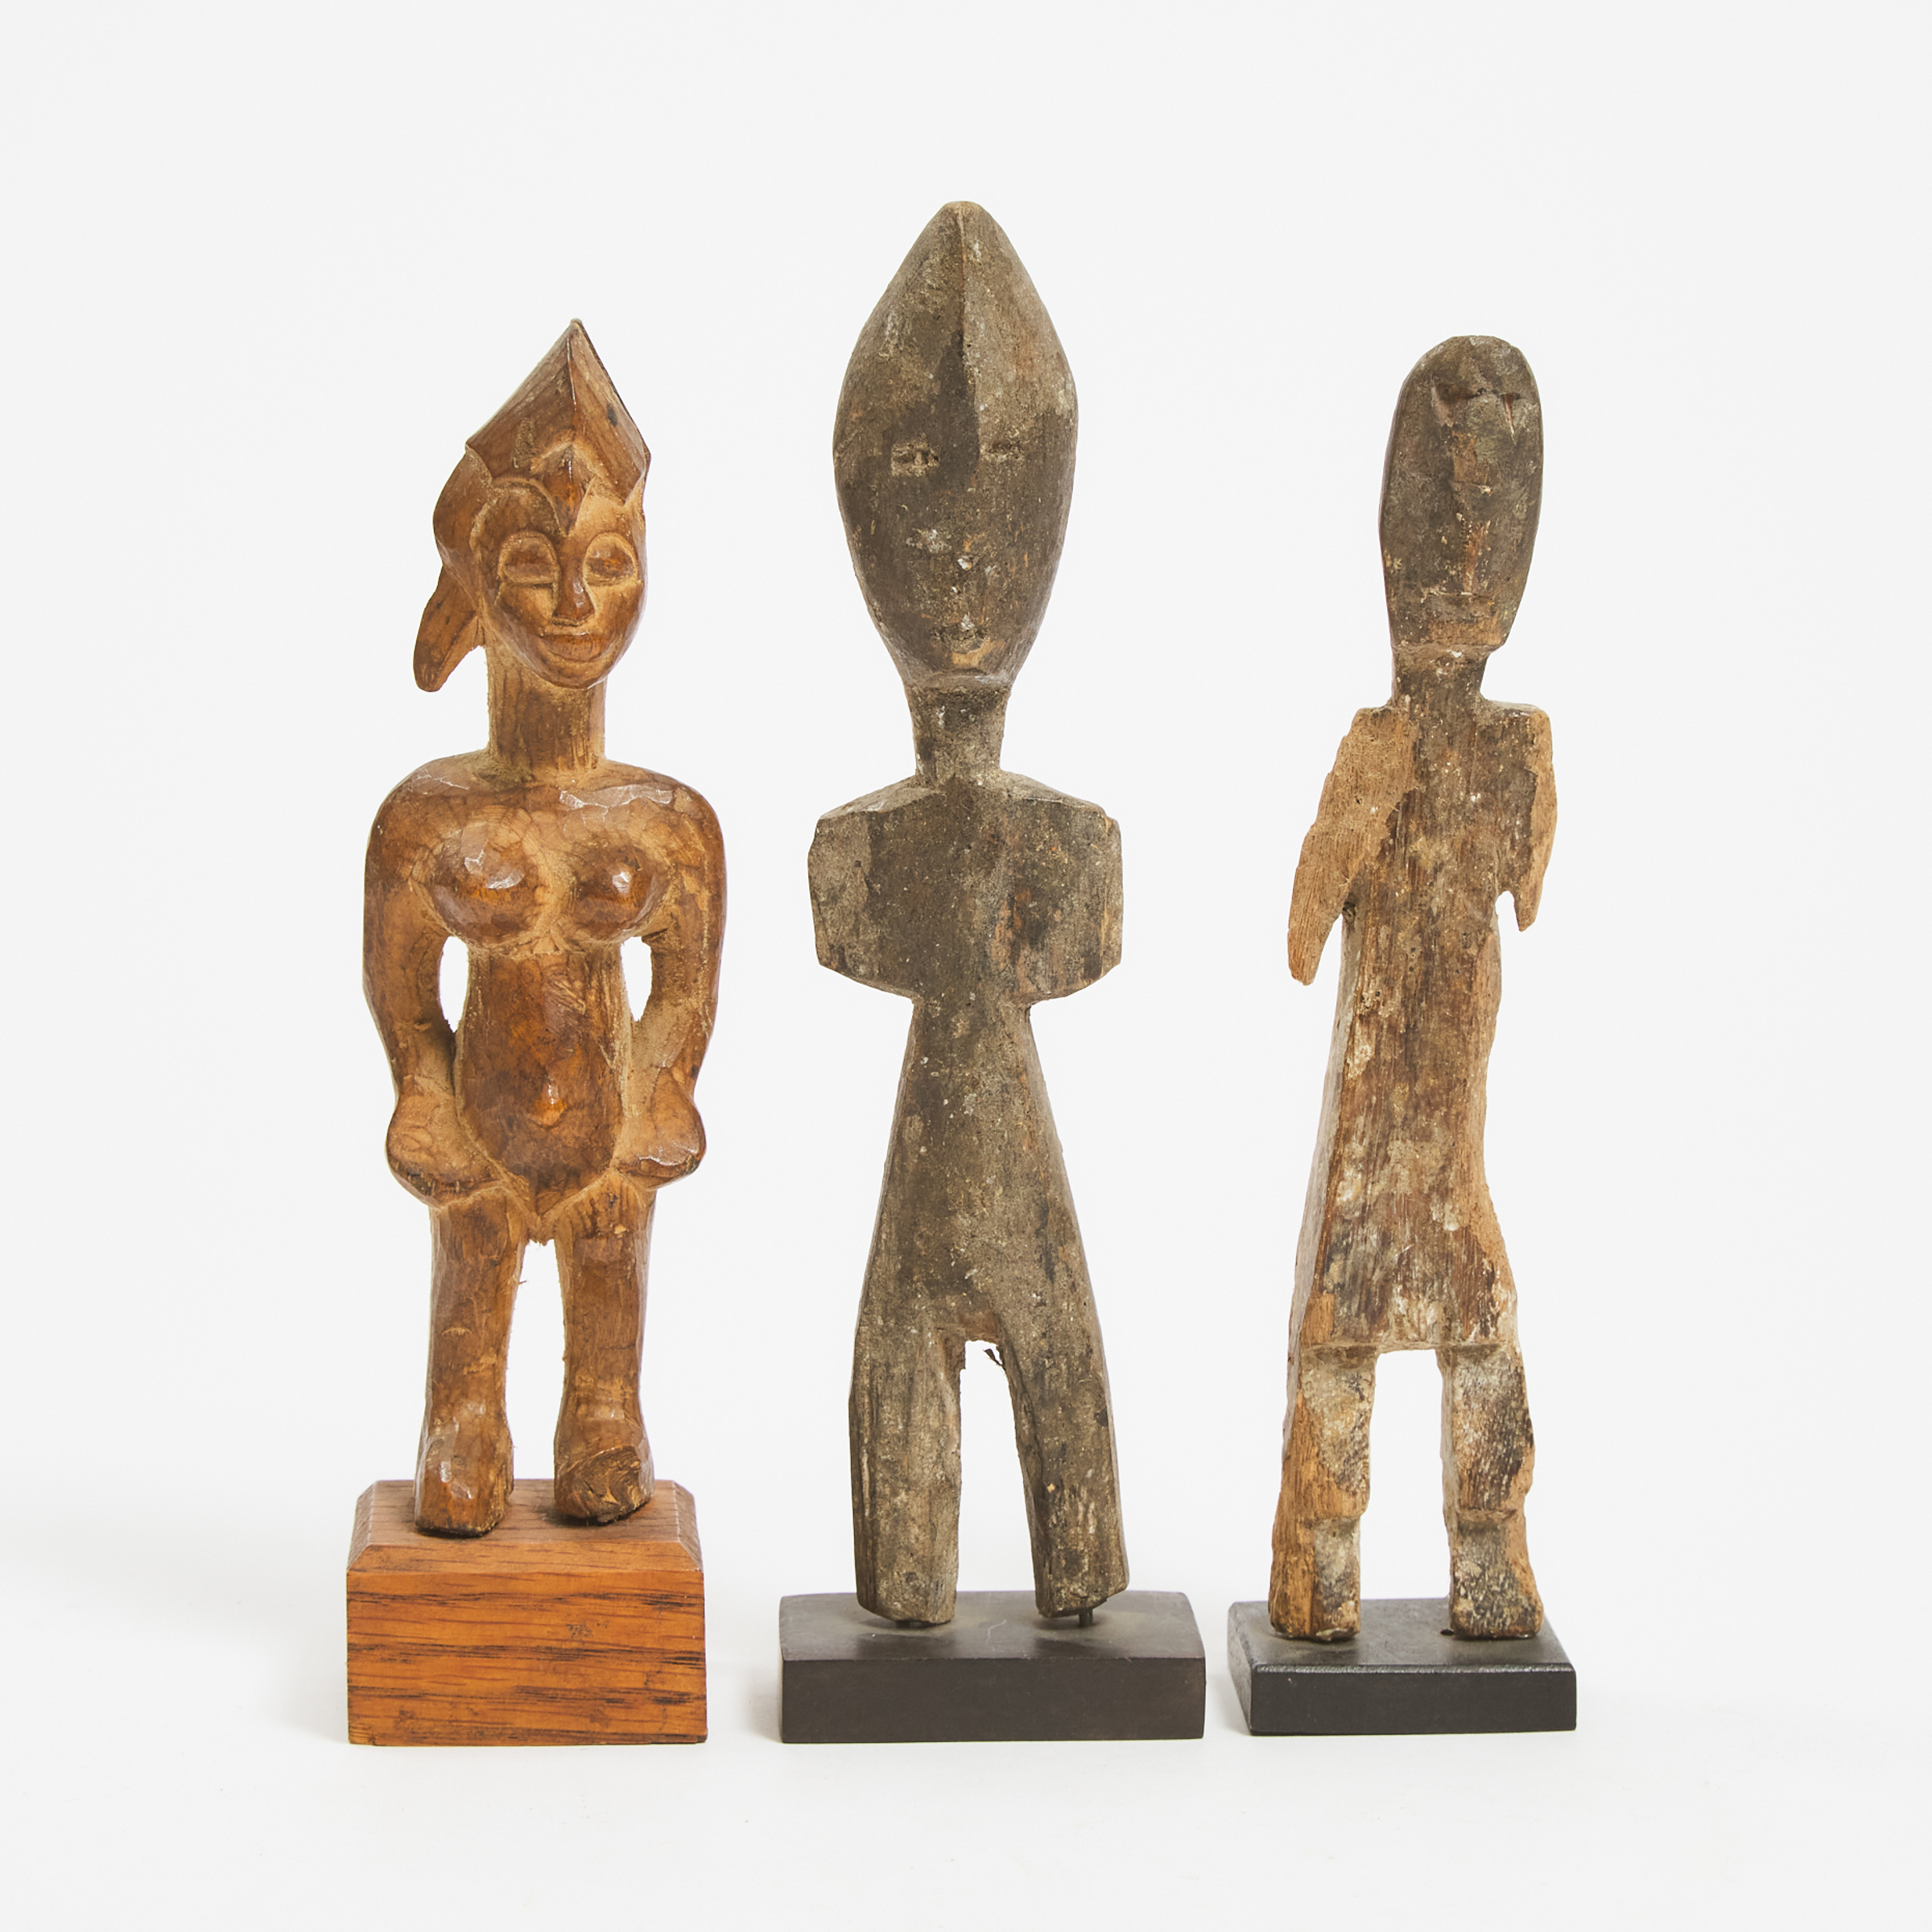 Senufo Female Figure, South Africa together with two unidentified African figures, 20th century, two possibly 19th century